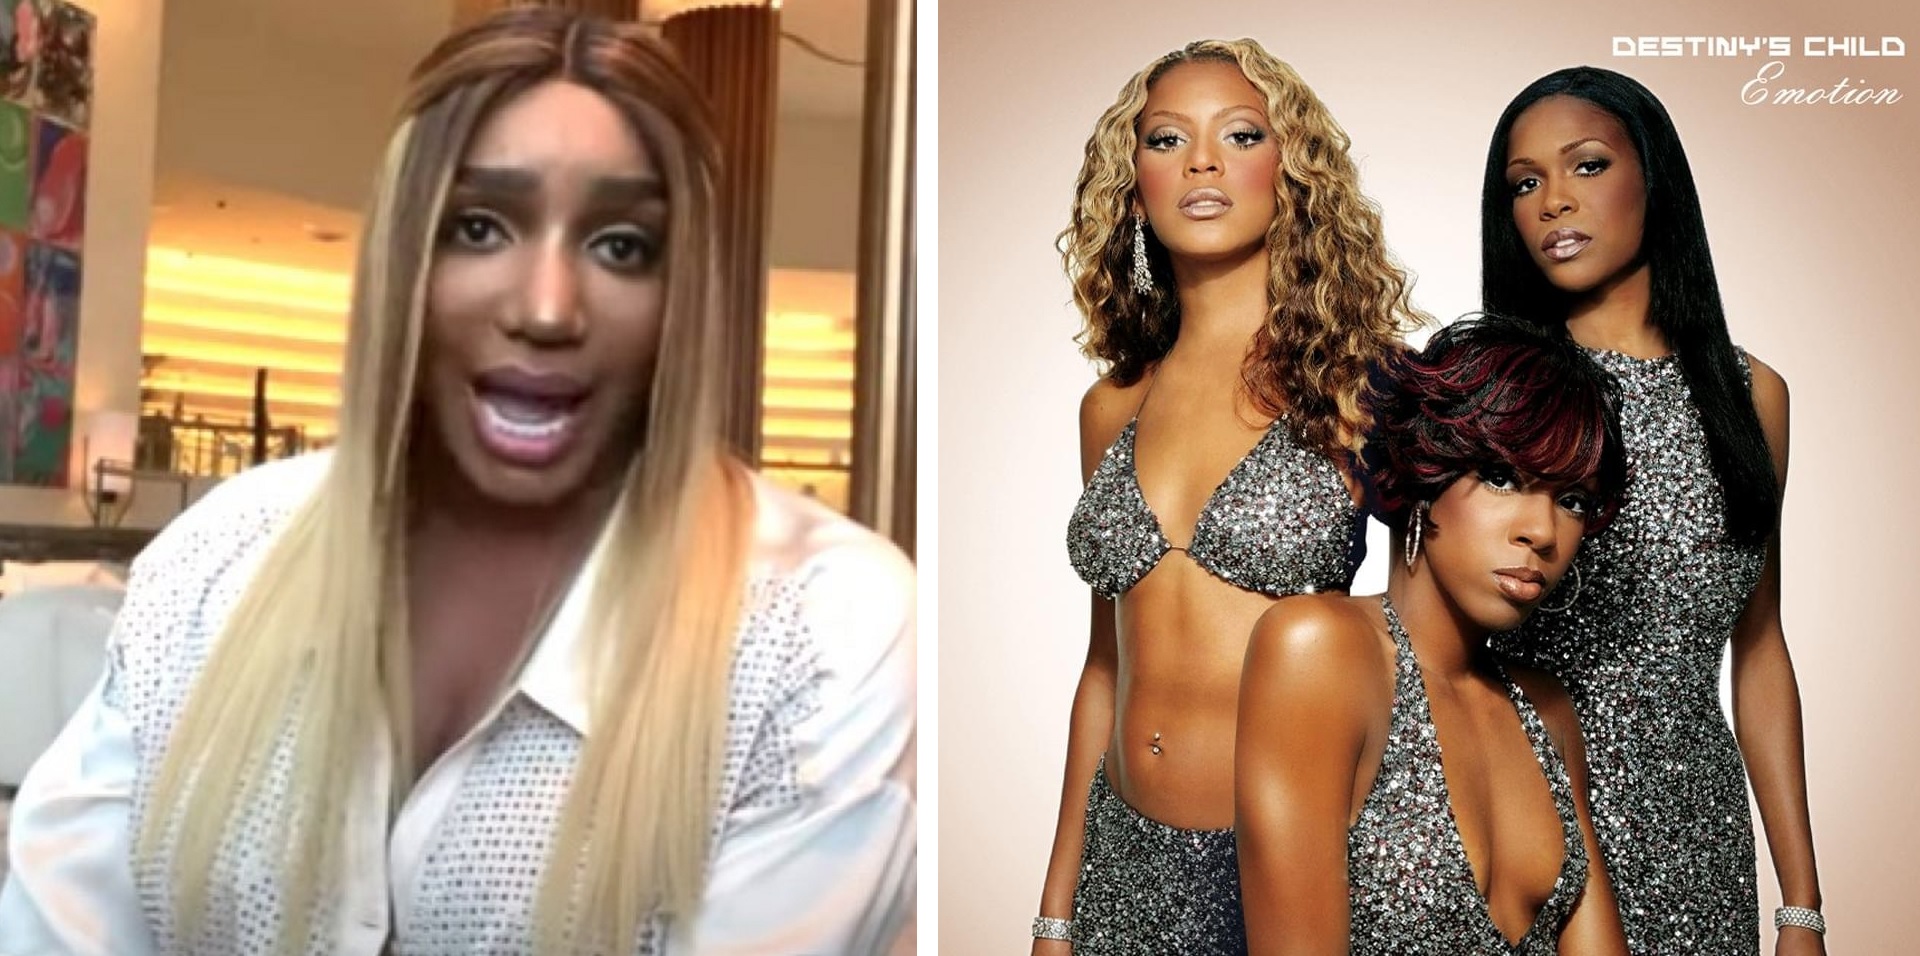 Nene Leakes On RHOA Exit: “It’s Hard To Have Destiny’s Child & Take Beyonce Out”